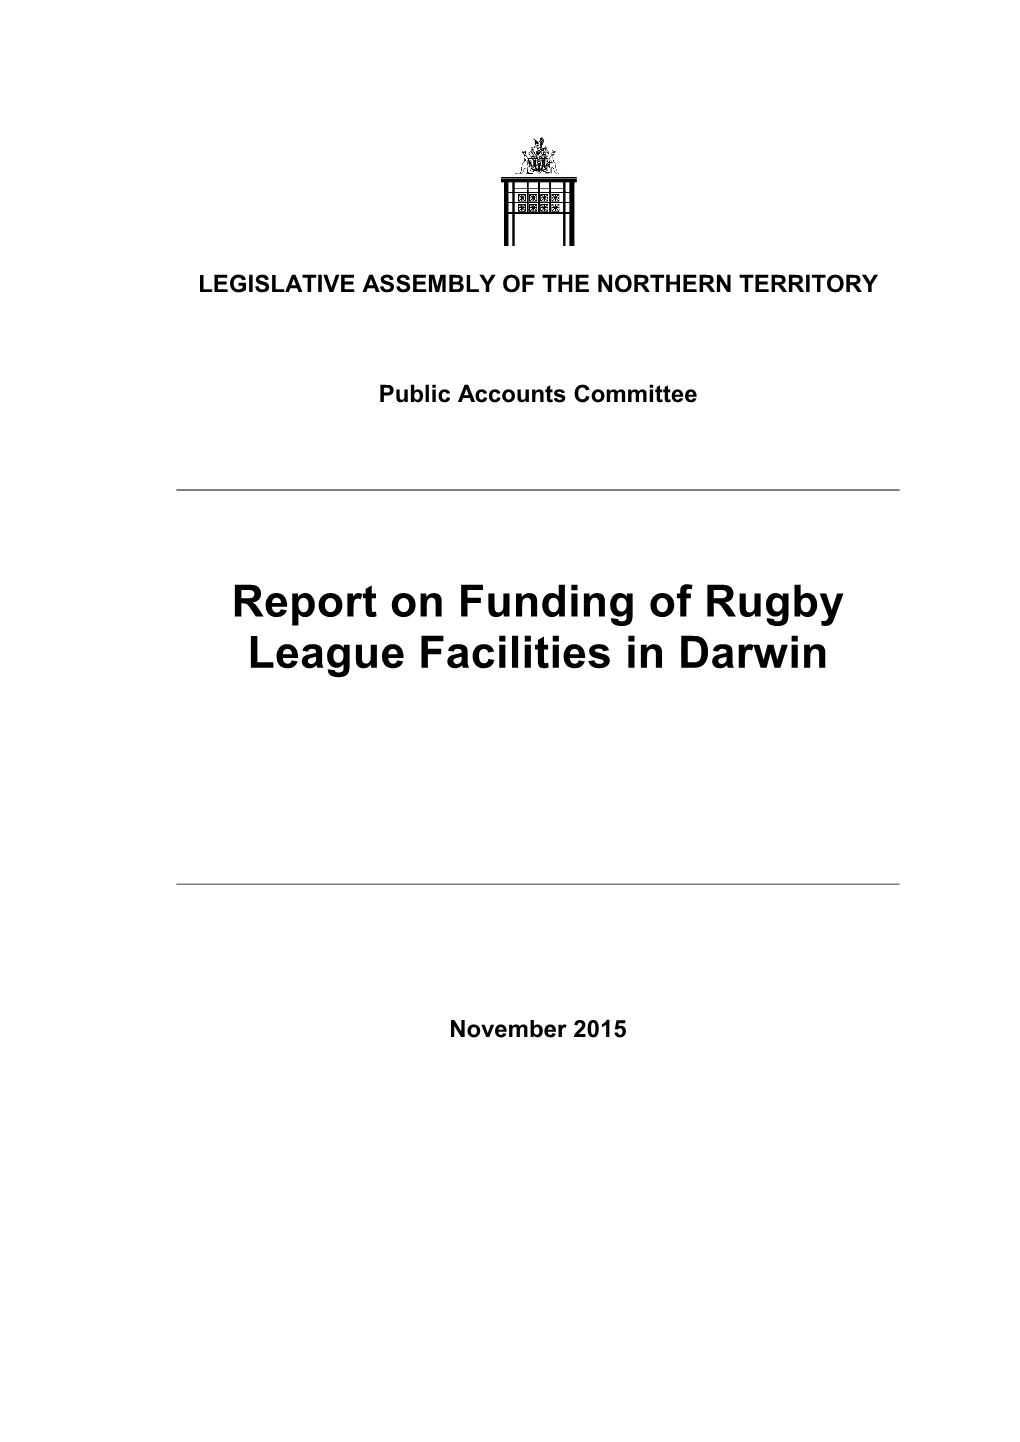 Report on Funding of Rugby League Facilities in Darwin